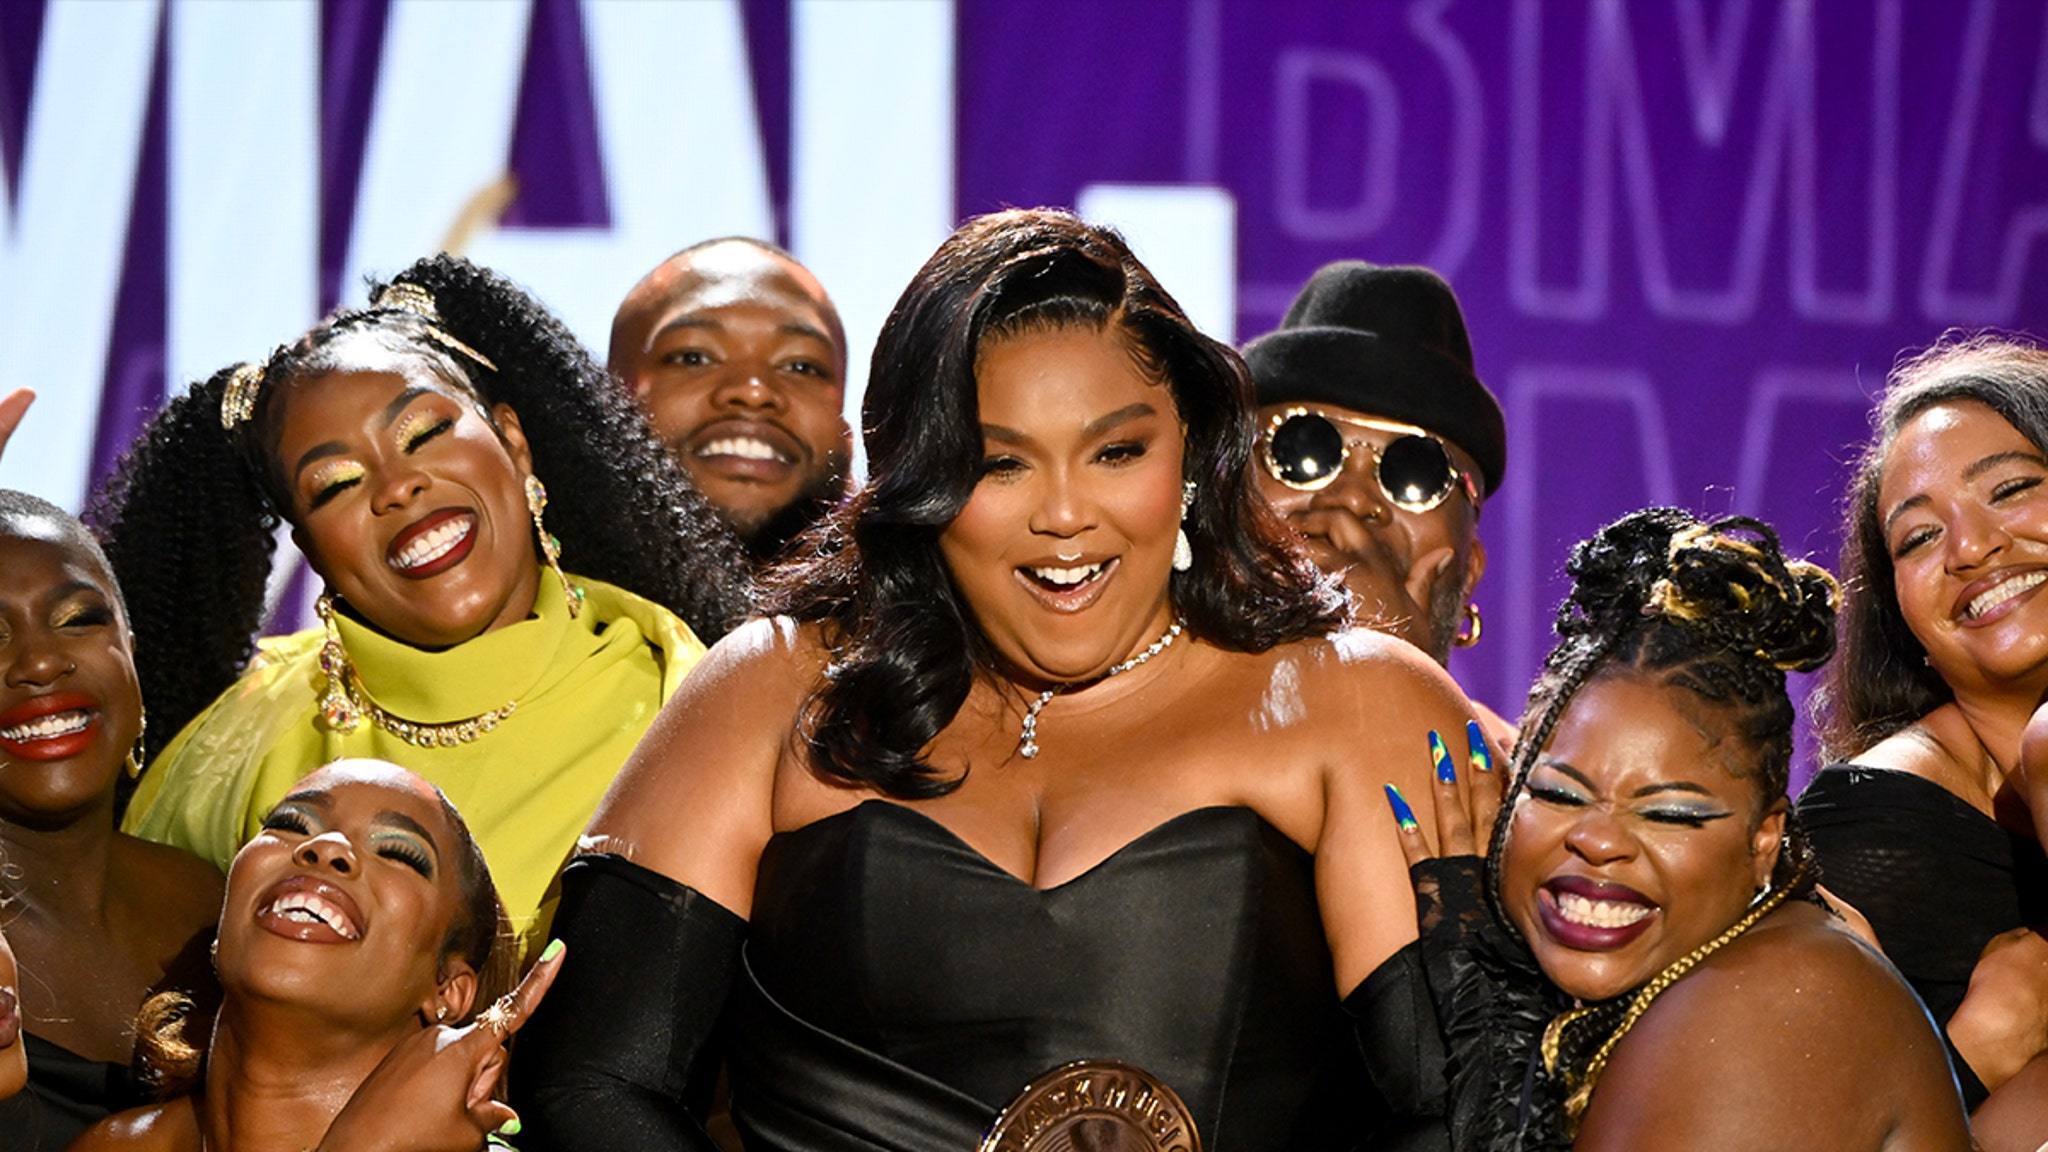 Lizzo Accepts Humanitarian Award Surrounded by Black Plus-Sized Women